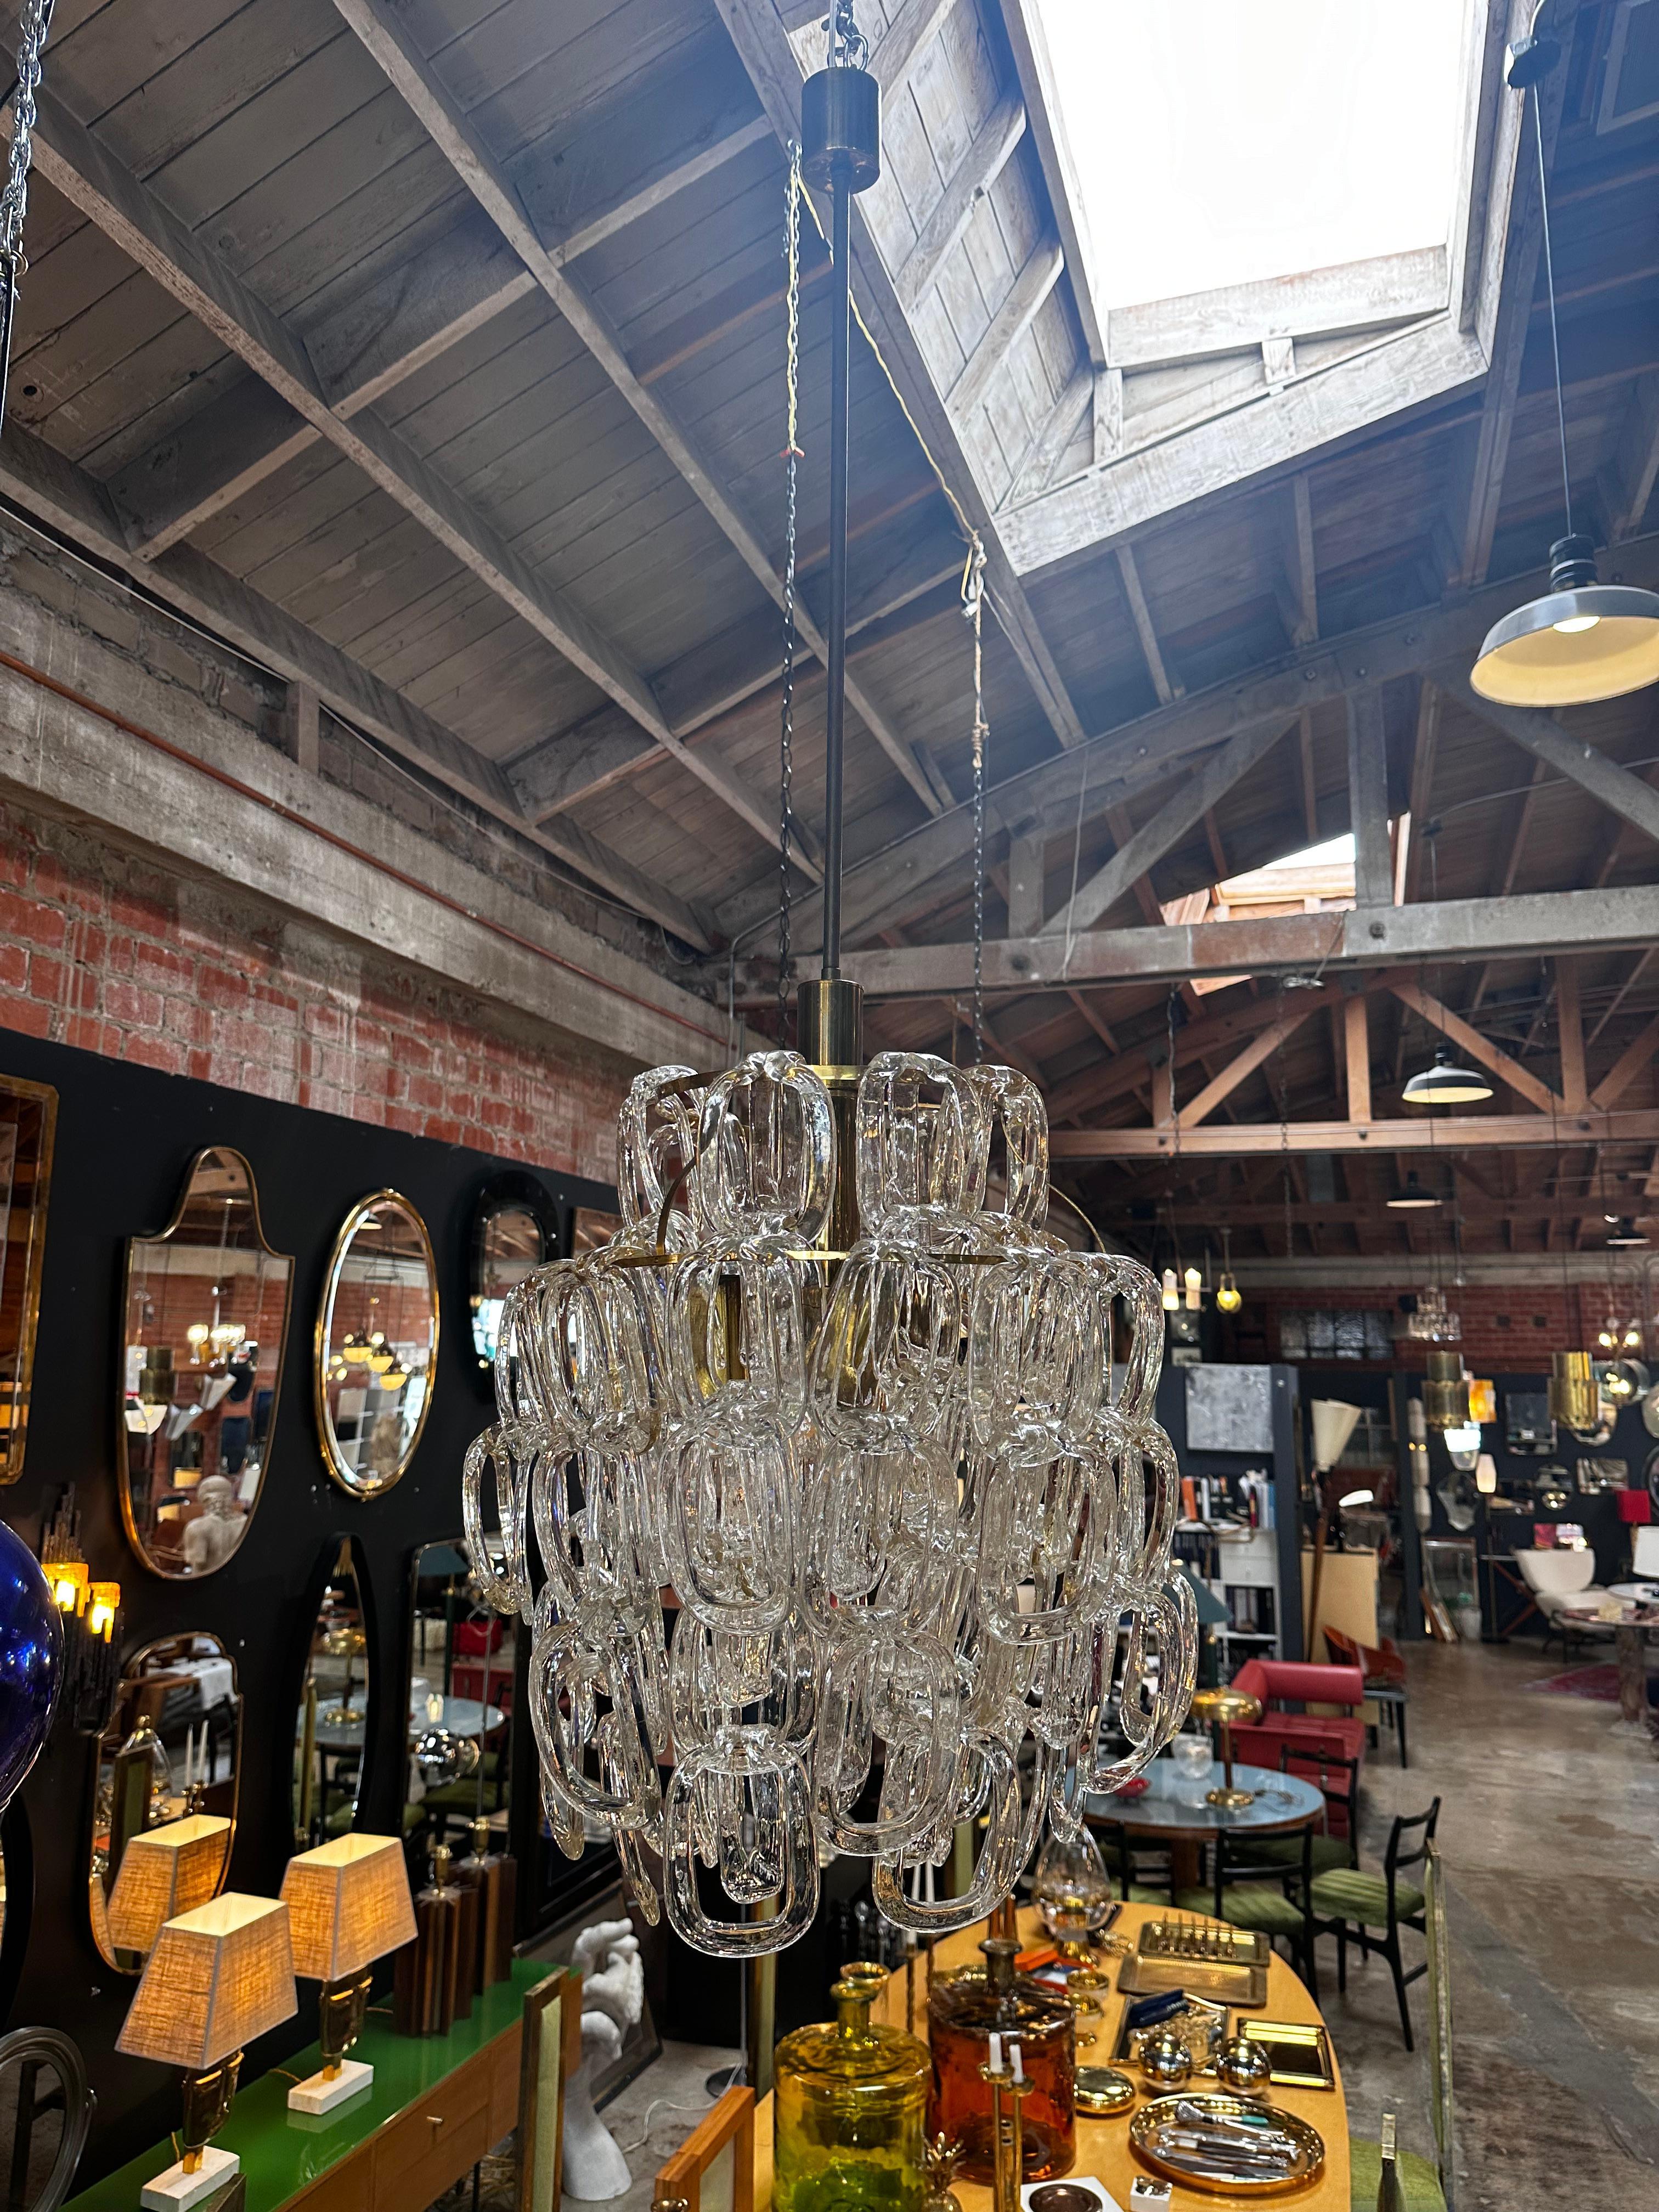 The Murano chandelier crafted in Italy in 1980 features a stunning design with a brass base and cascading Murano glass chain pieces, creating a captivating visual cascade of elegance and craftsmanship.
